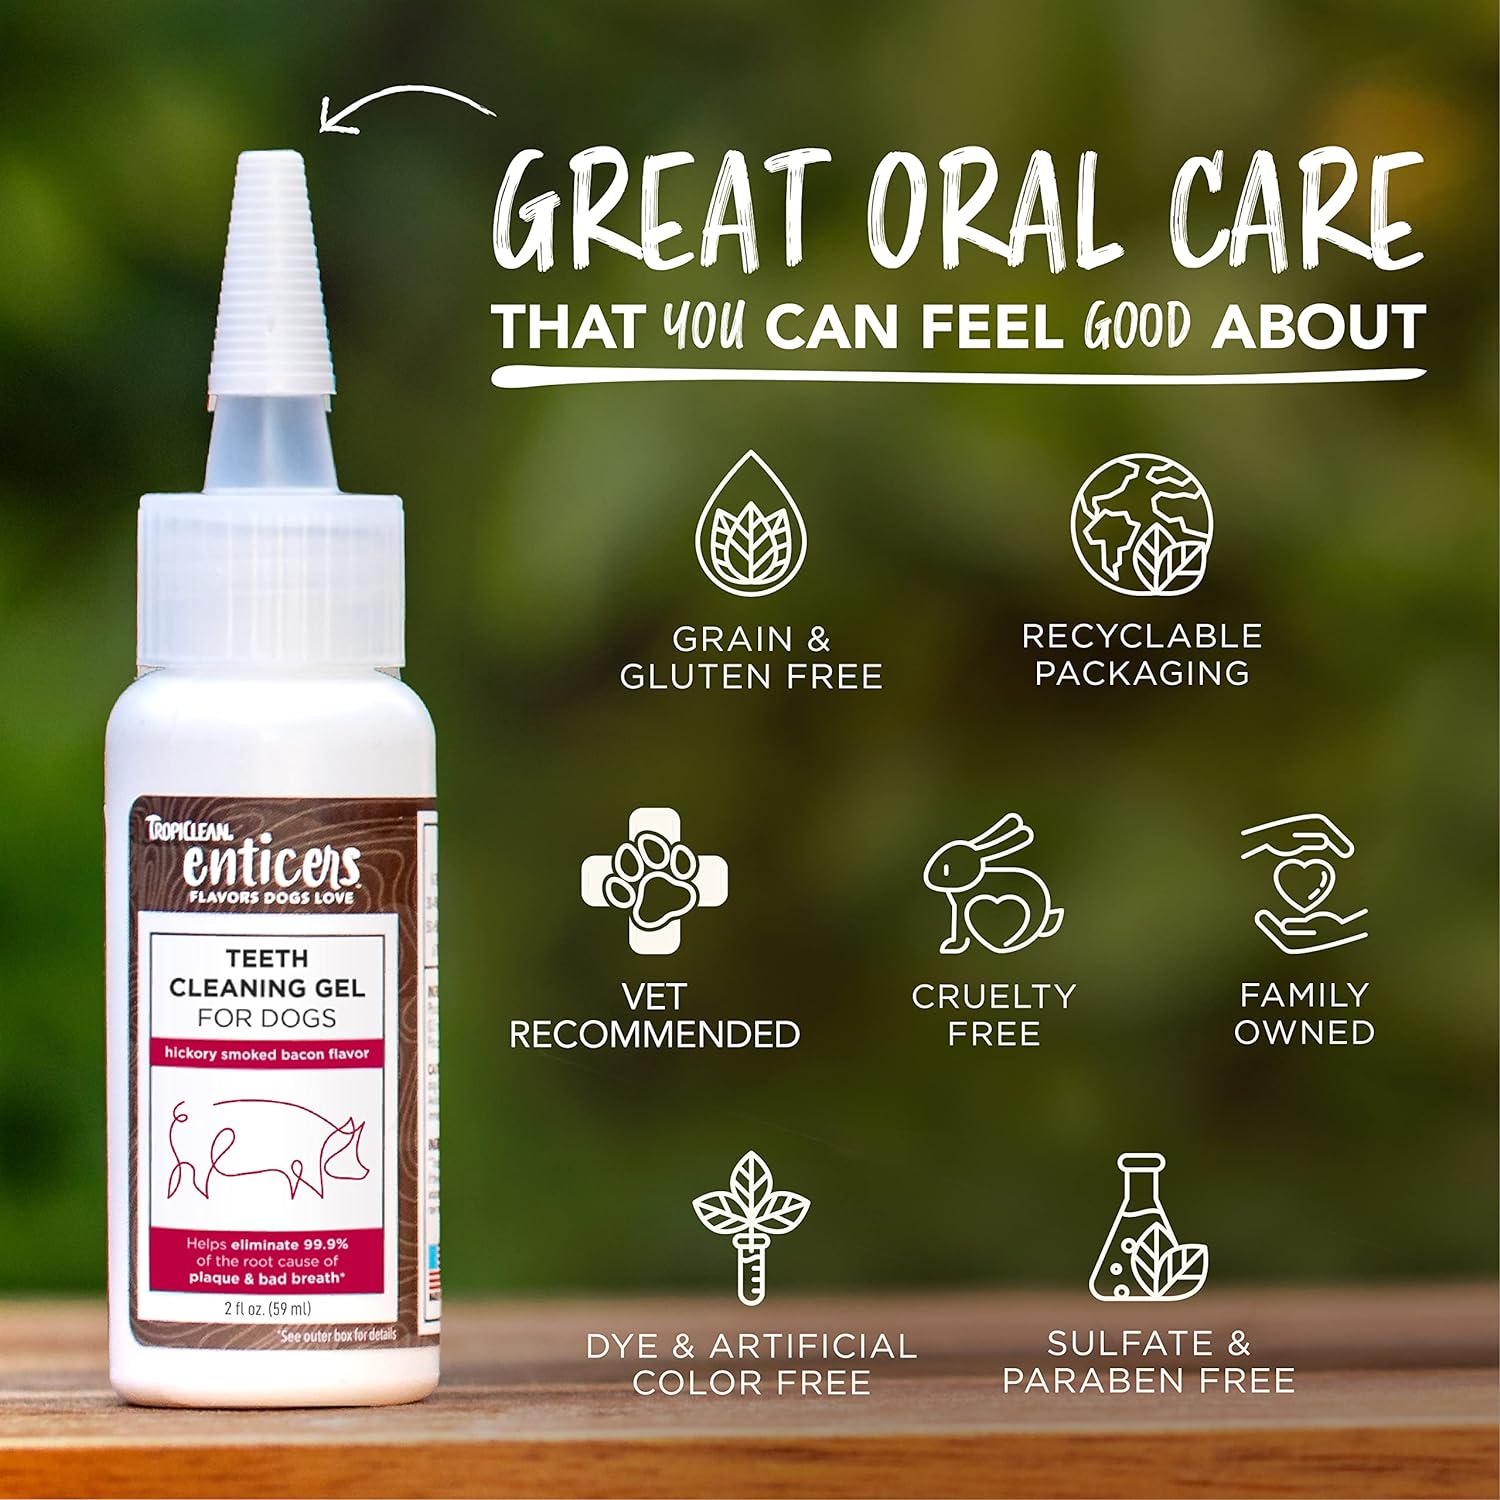 TropiClean Enticers Teeth Cleaning Gel for Dogs - Hickory Smoked Bacon Flavour, 59ml - Dental Gel - Helps Remove The Source of Bad Breath and Plaque - Flavour Dogs Love - No Brushing Required :Pet Supplies